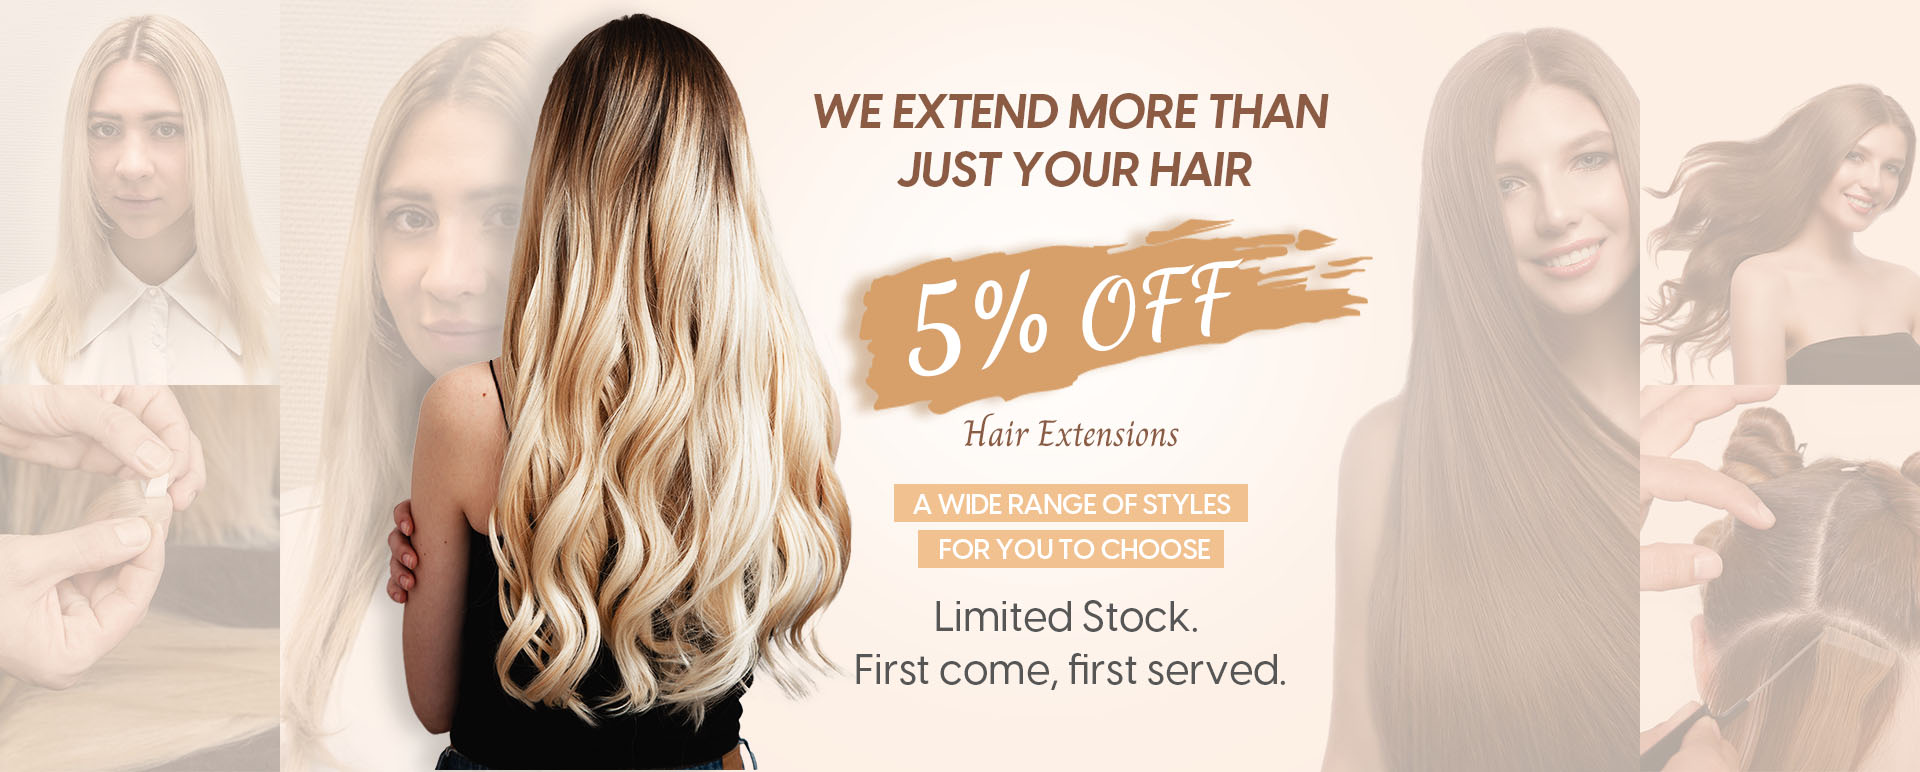 hair extensions sale banner